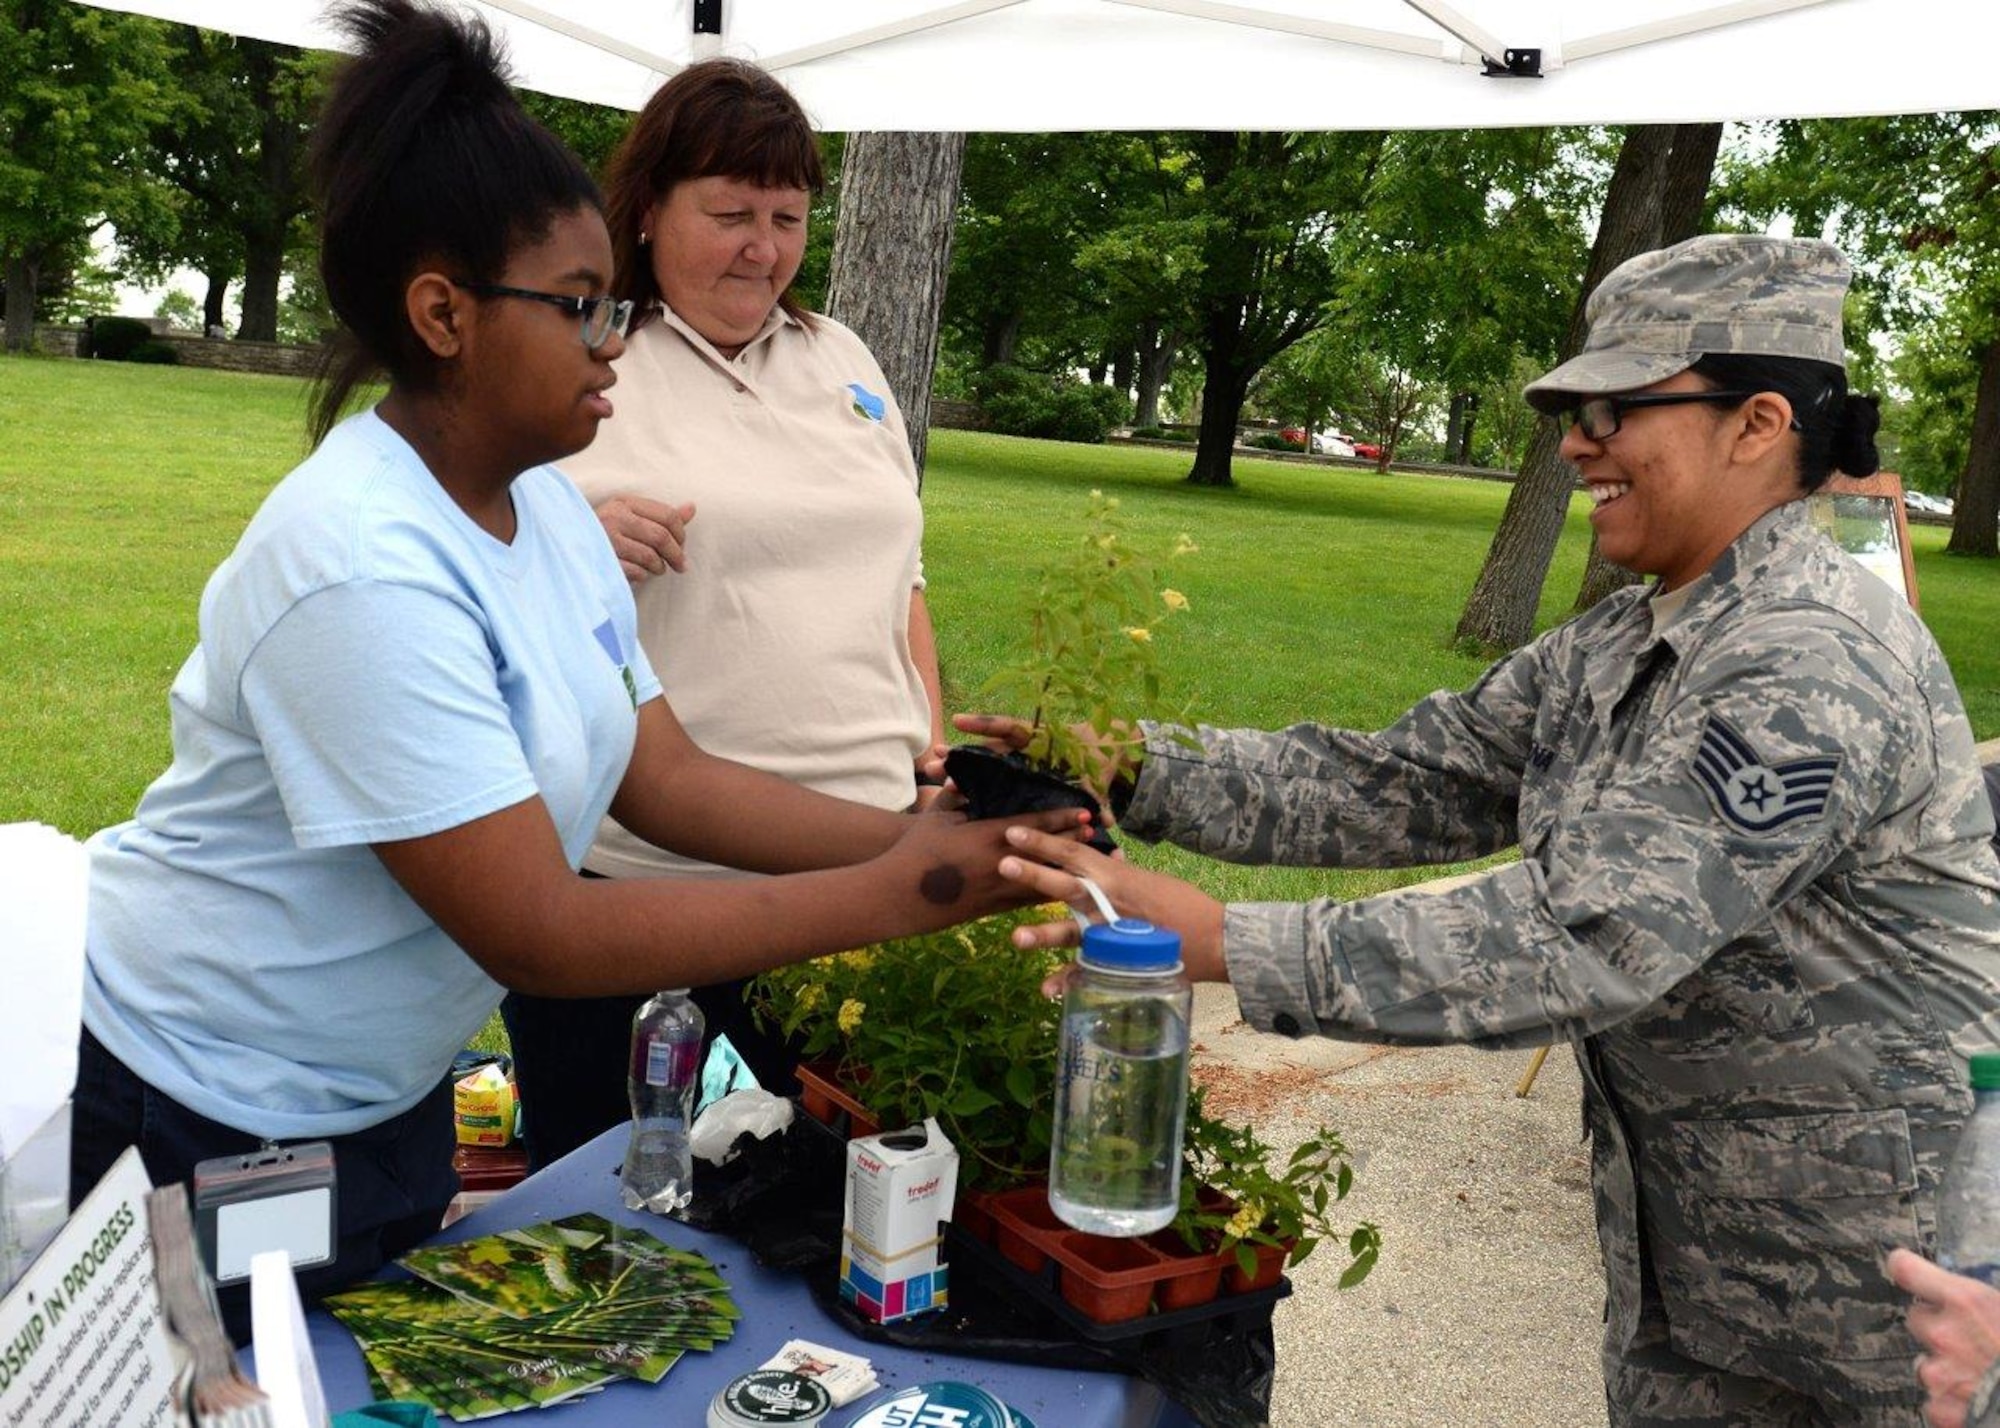 Raejean Smith, Five River Metro Parks volunteer, gives a Lantana plant to Staff Sgt. Cassandra Mena, United States Air Force School ofAerospace Medicine industrial hygiene laboratory technician, during the Pollinator Expo held at the Wright Brothers Memorial located outside Wright-Patterson Air Force BaseJune 21. Numerous local organizations were on site to highlight the work they do to protect pollinators and their habitats.(U.S.Air Force photo/Michelle Gigante)